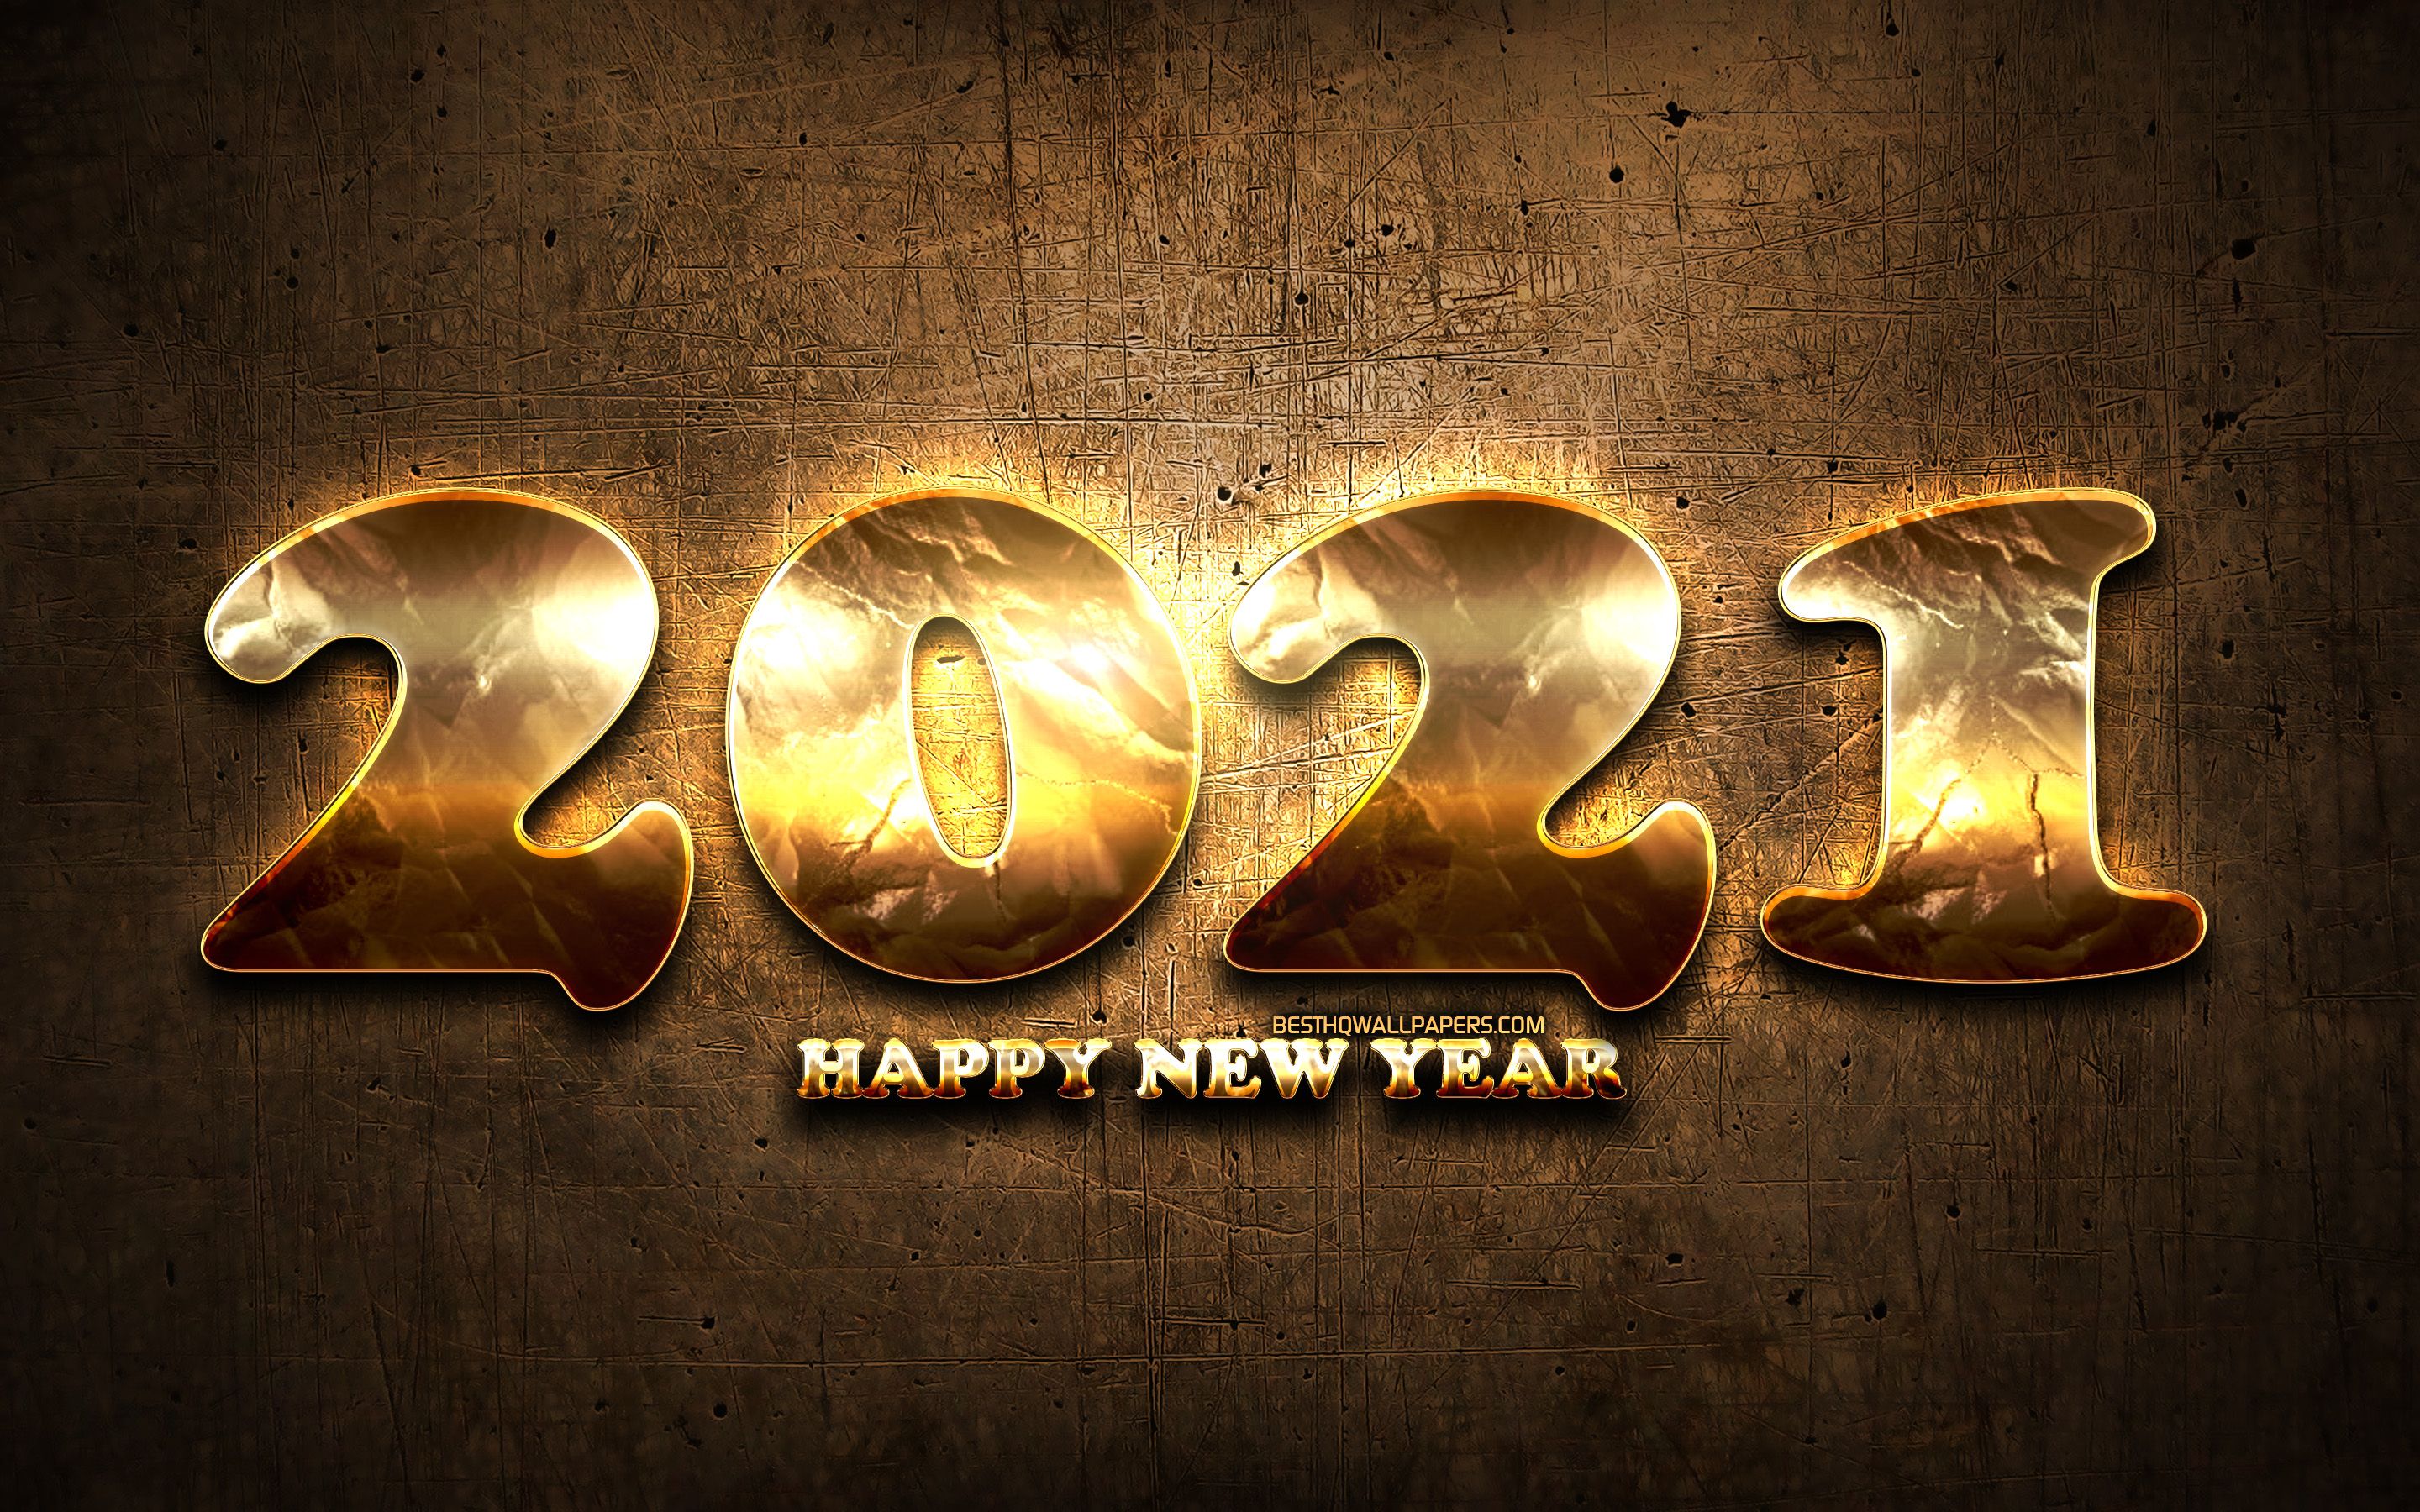 Download wallpaper 2021 new year, brown wooden background, 2021 golden digits, 2021 concepts, 2021 on wooden background, 2021 year digits, Happy New Year 2021 for desktop with resolution 2880x1800. High Quality HD picture wallpaper